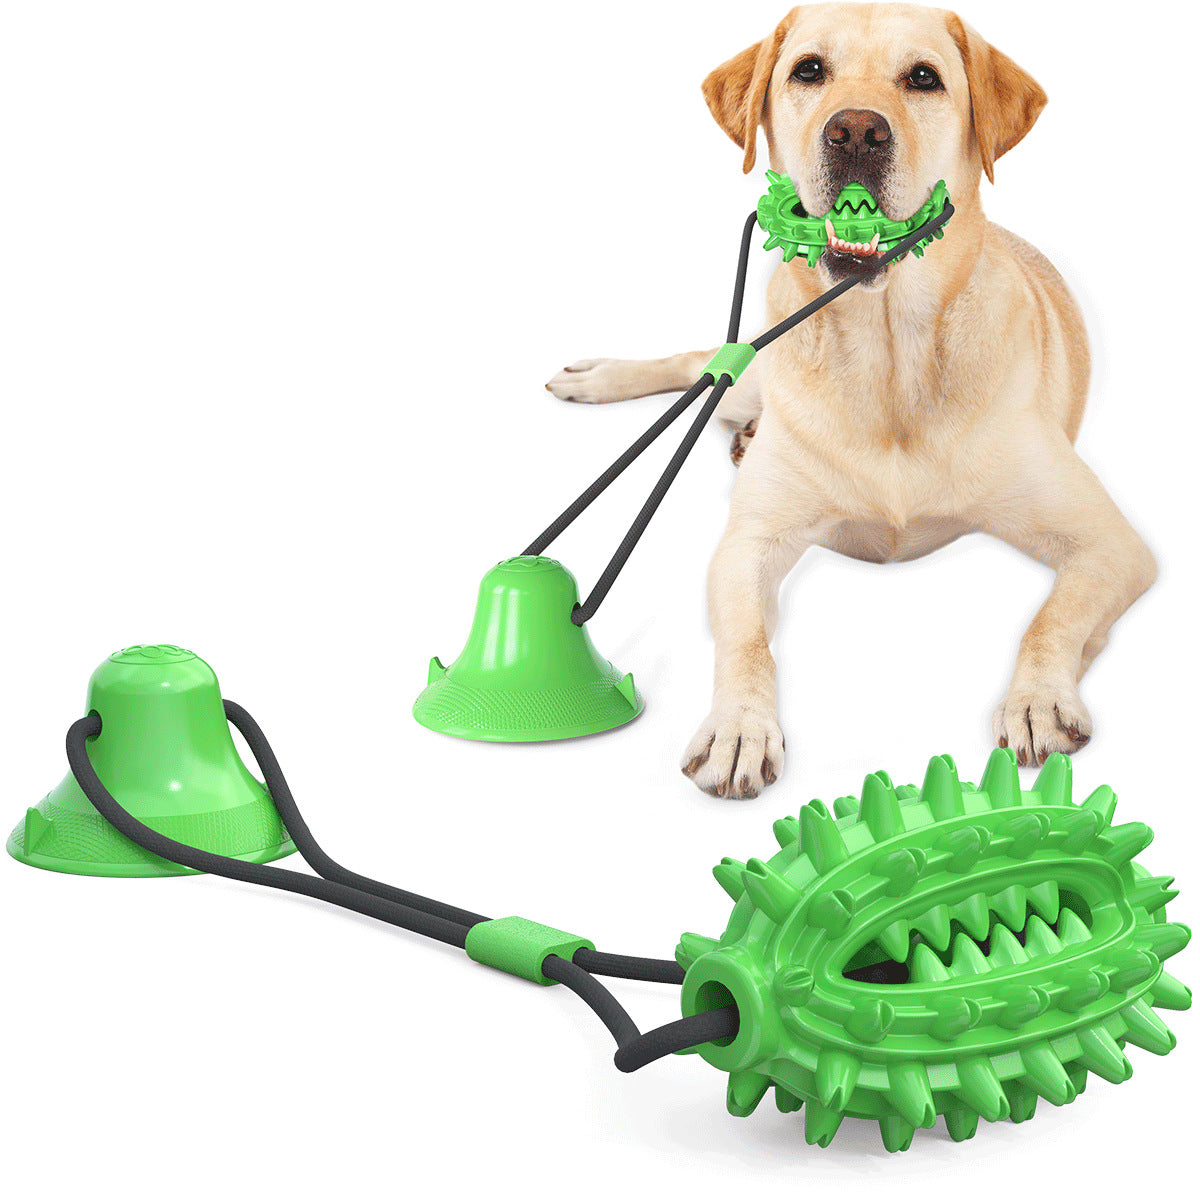 Outdoor Molar Suction Cup Dog Toy with Drawstring Ball Leakage, Dog Toy JonxiFon